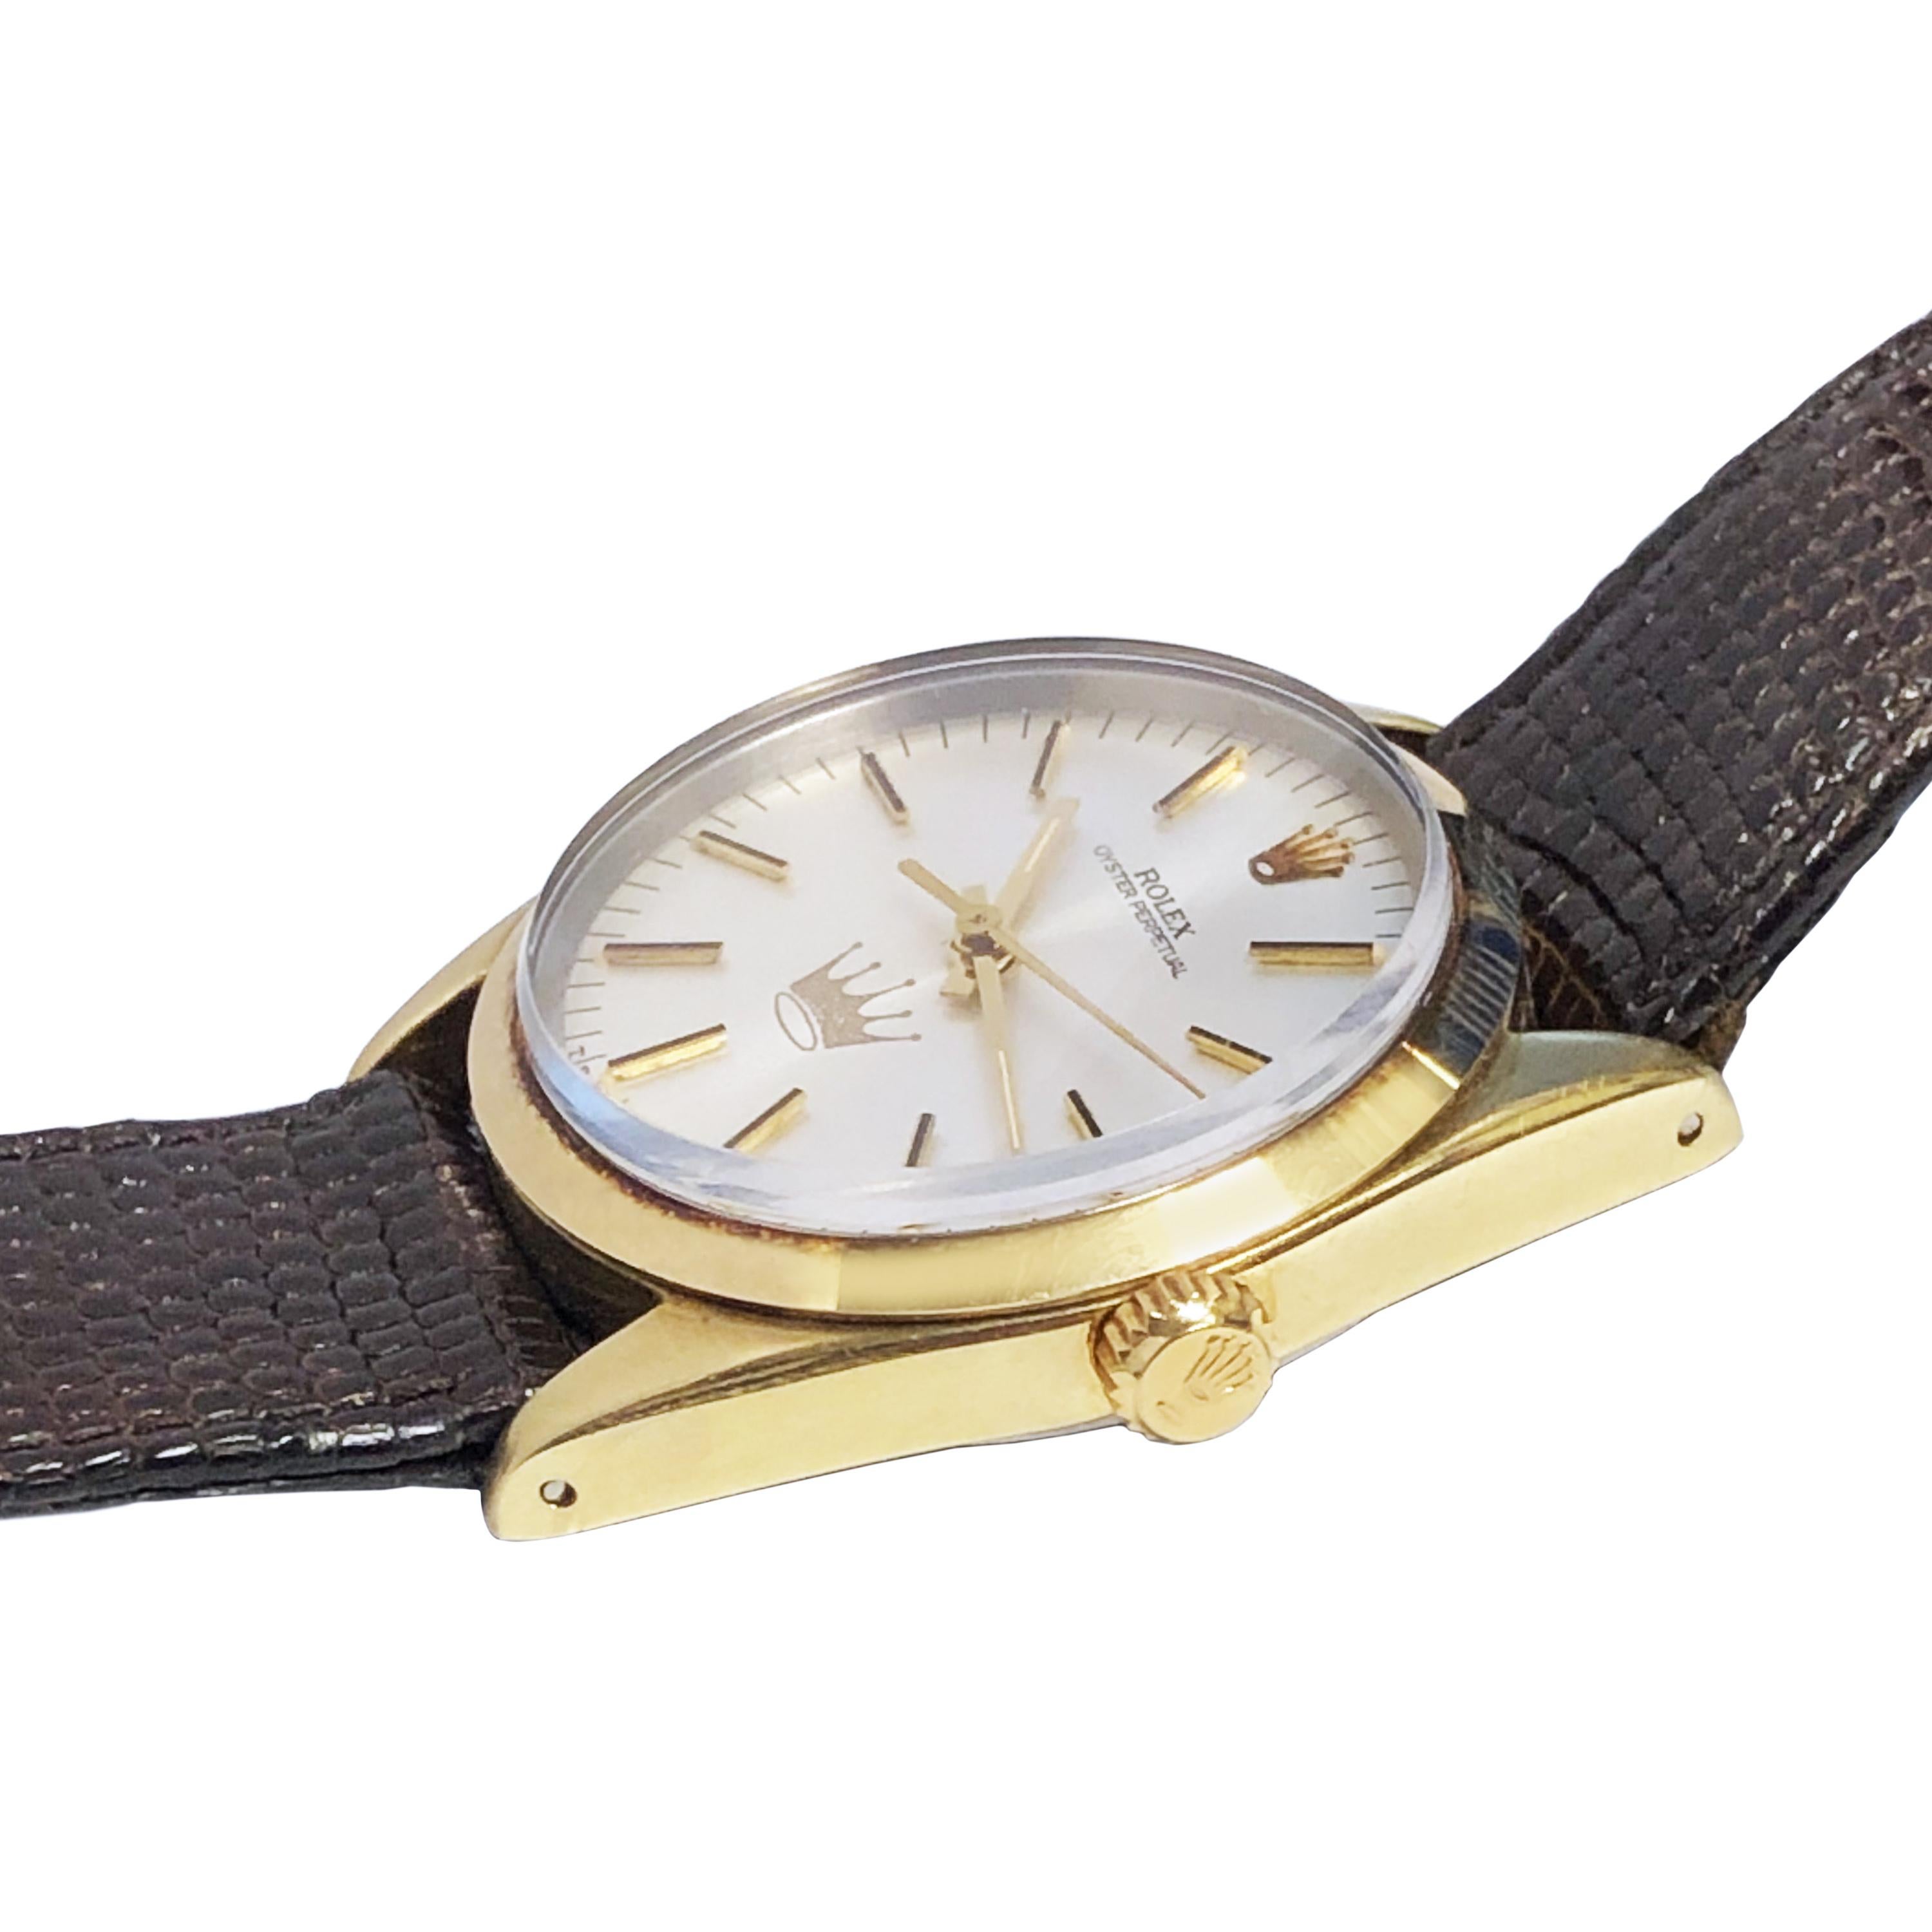 Circa 1984 Rolex Reference 1024 Wrist watch, 34 m.m. Gold Shell with Steel back Oyster case. Caliber 1570 automatic, self winding movement. Silver Satin dial with raised markers, sweep seconds hand and a company Crown form logo of the Hallmark